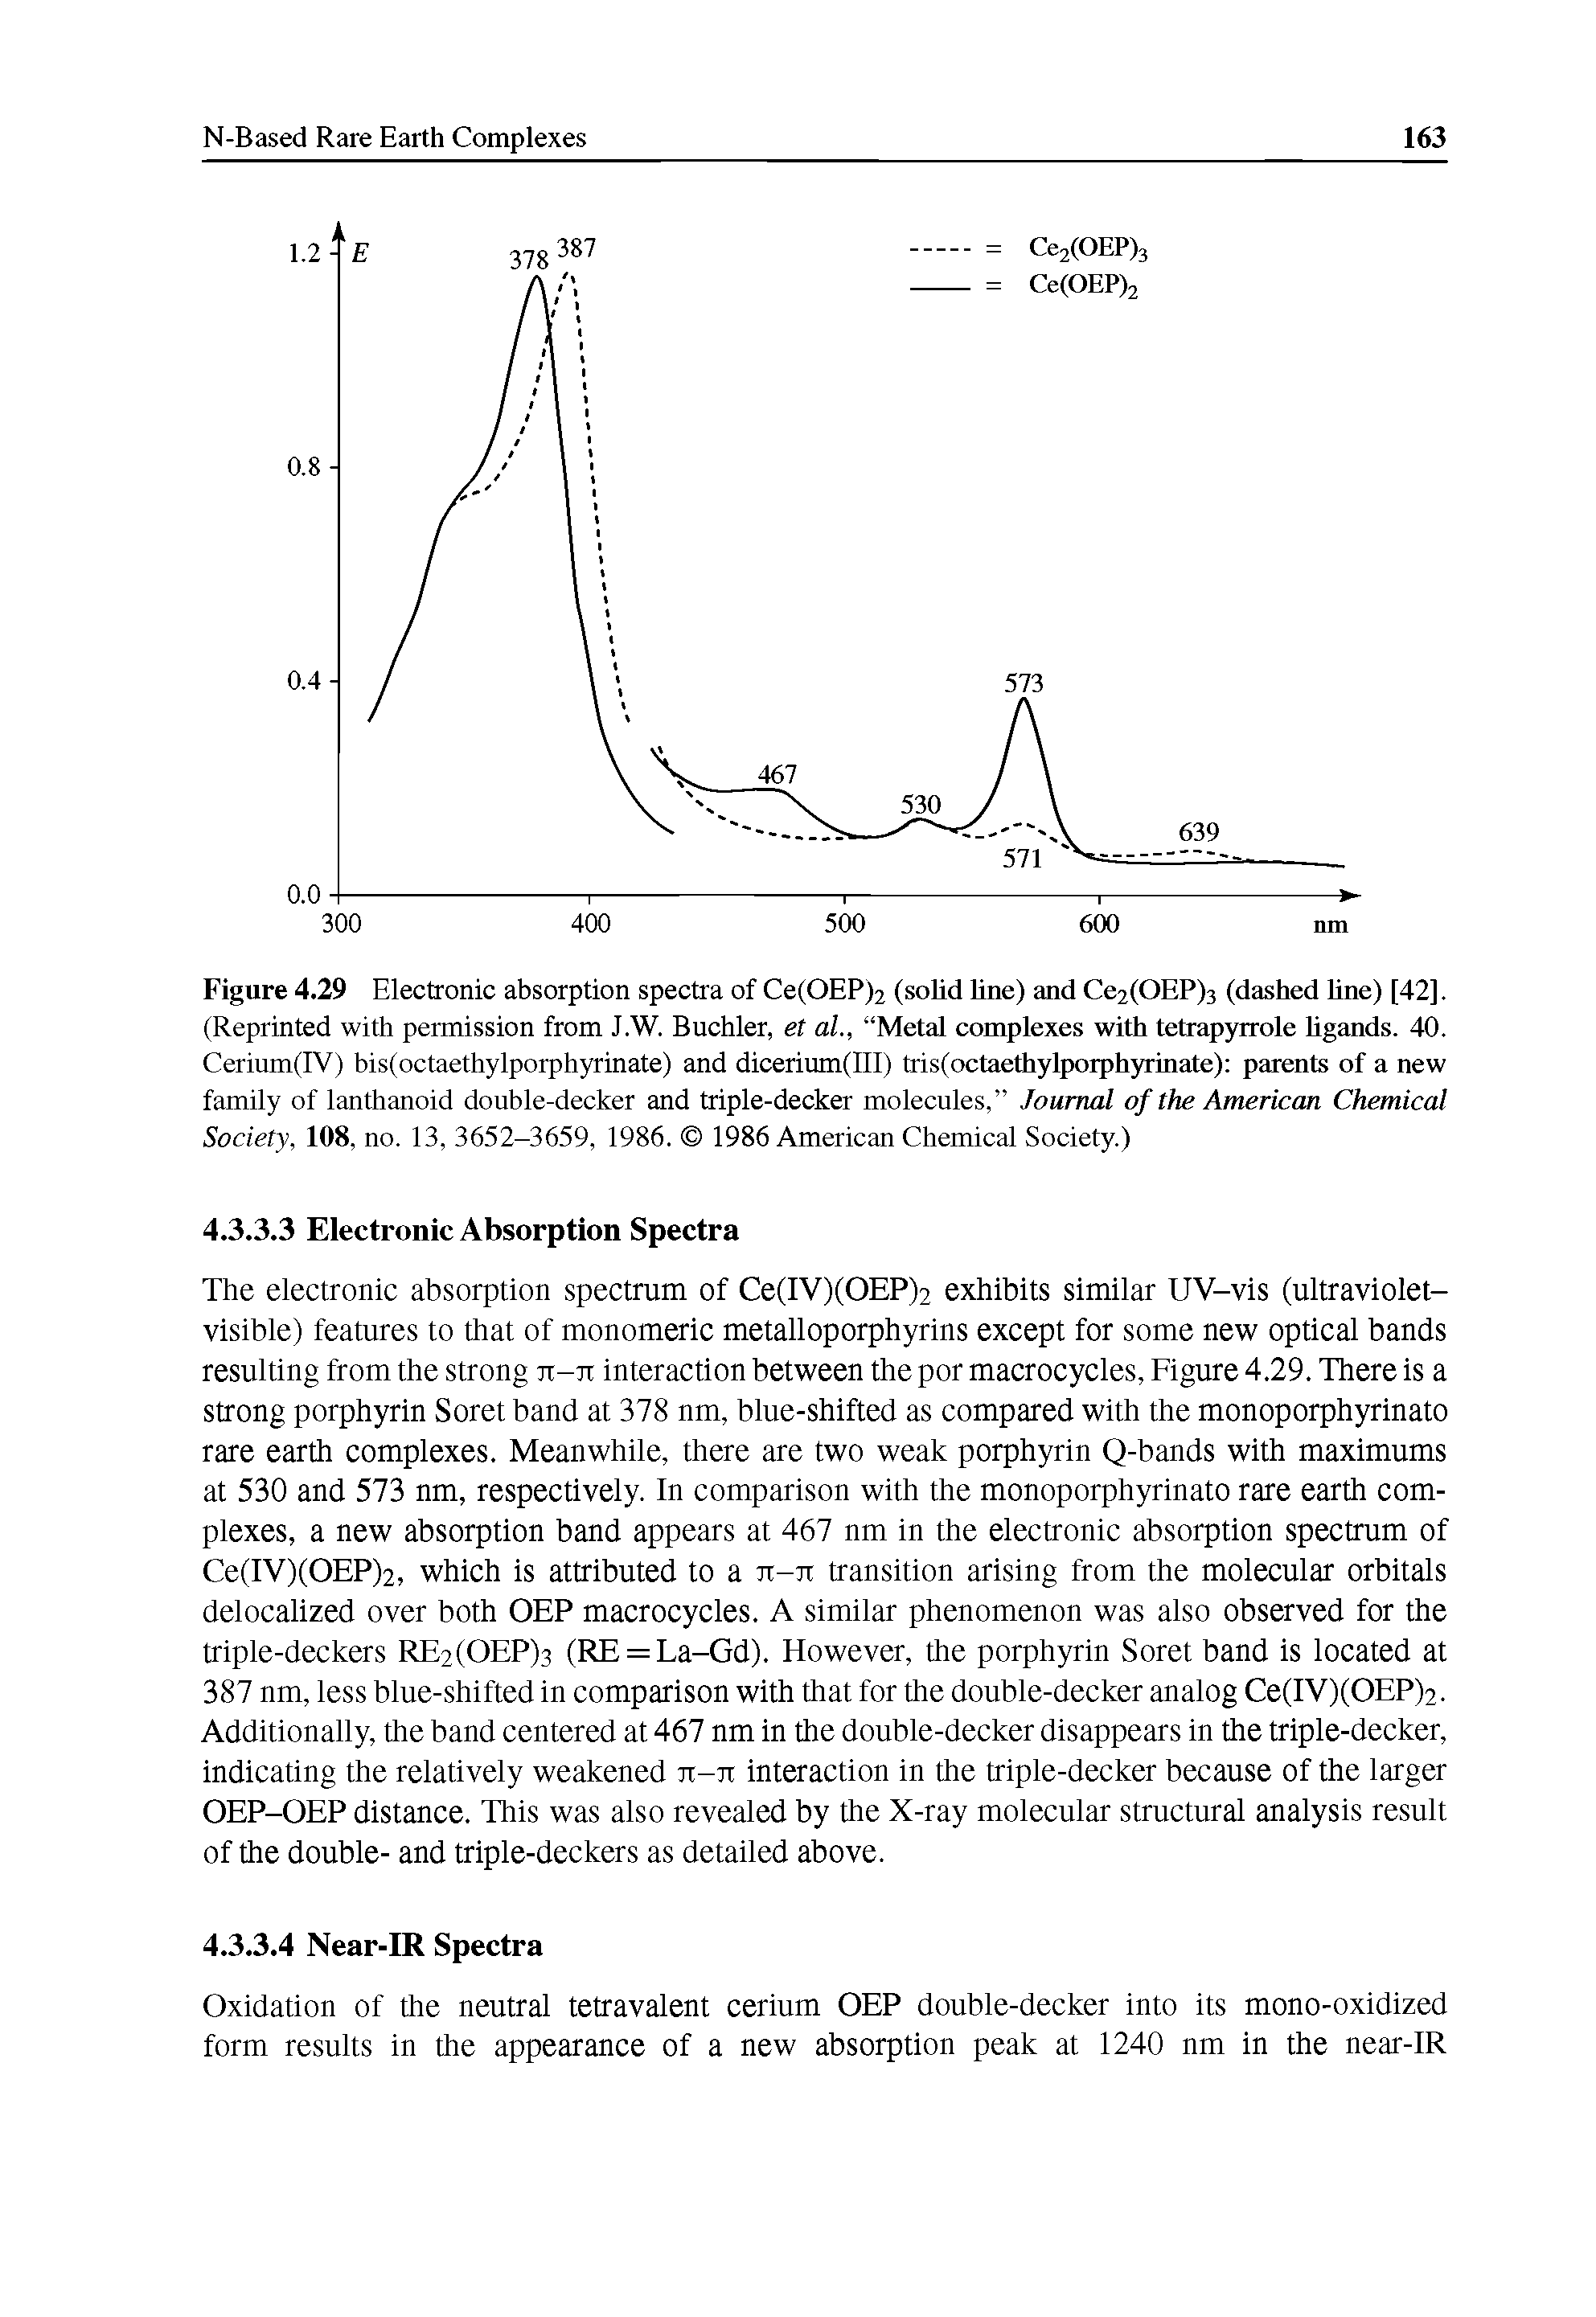 Figure 4.29 Electronic absorption spectra of Ce(OEP)2 (solid line) and Ce2(OEP)3 (dashed Une) [42]. (Reprinted with permission from J.W. Buchler, et al., Metal complexes with tetrapyrrole ligands. 40. Cerium(IV) bis(octaethylporphyrinate) and dicerium(III) tris(octaethylporphyrinate) parents of a new family of lanthanoid double-decker and triple-decker molecules, Journal of the American Chemical...